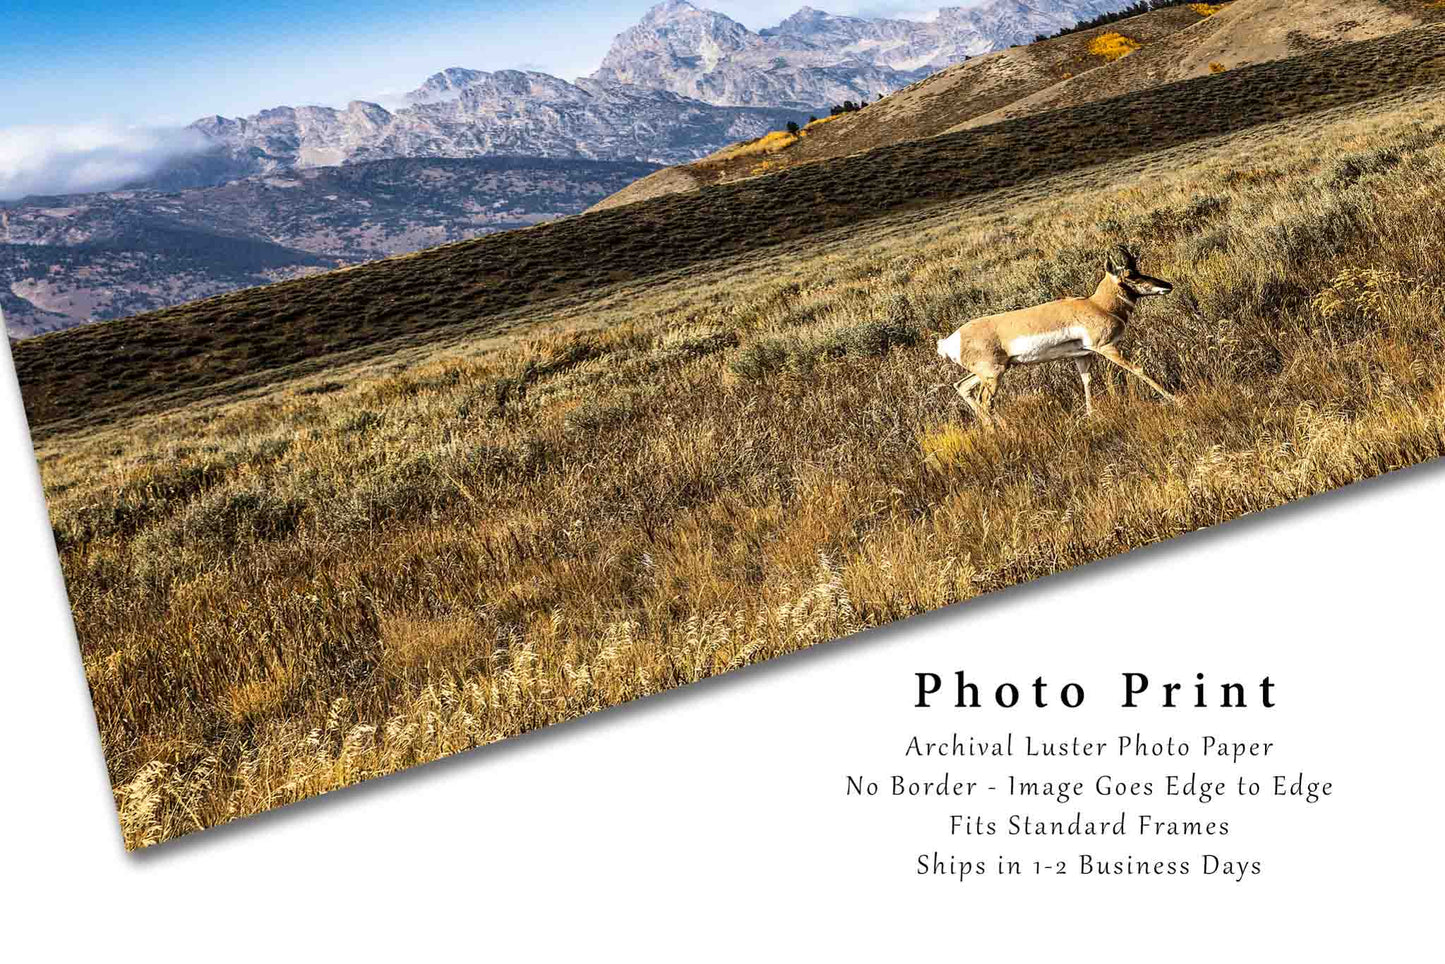 Western Photography Print (Not Framed) Picture of Pronghorn Antelope in Grand Teton National Park Wyoming Rocky Mountain Wall Art Wildlife Decor